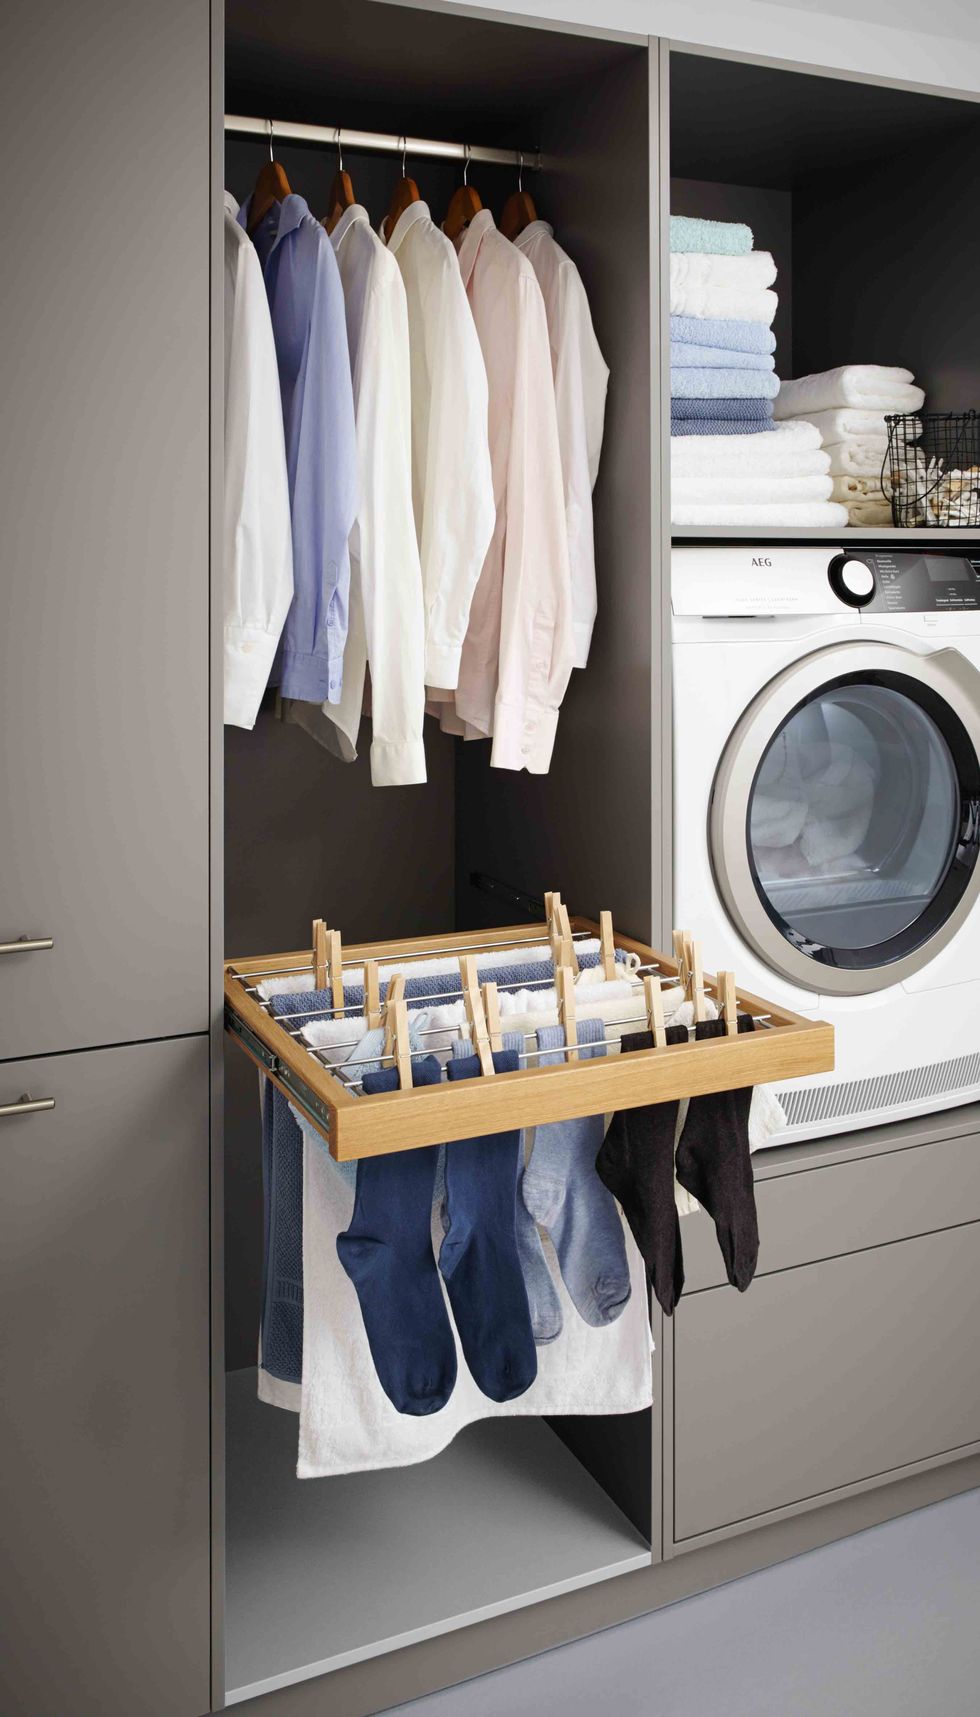 schüller.C collection - utility room - pull out rack